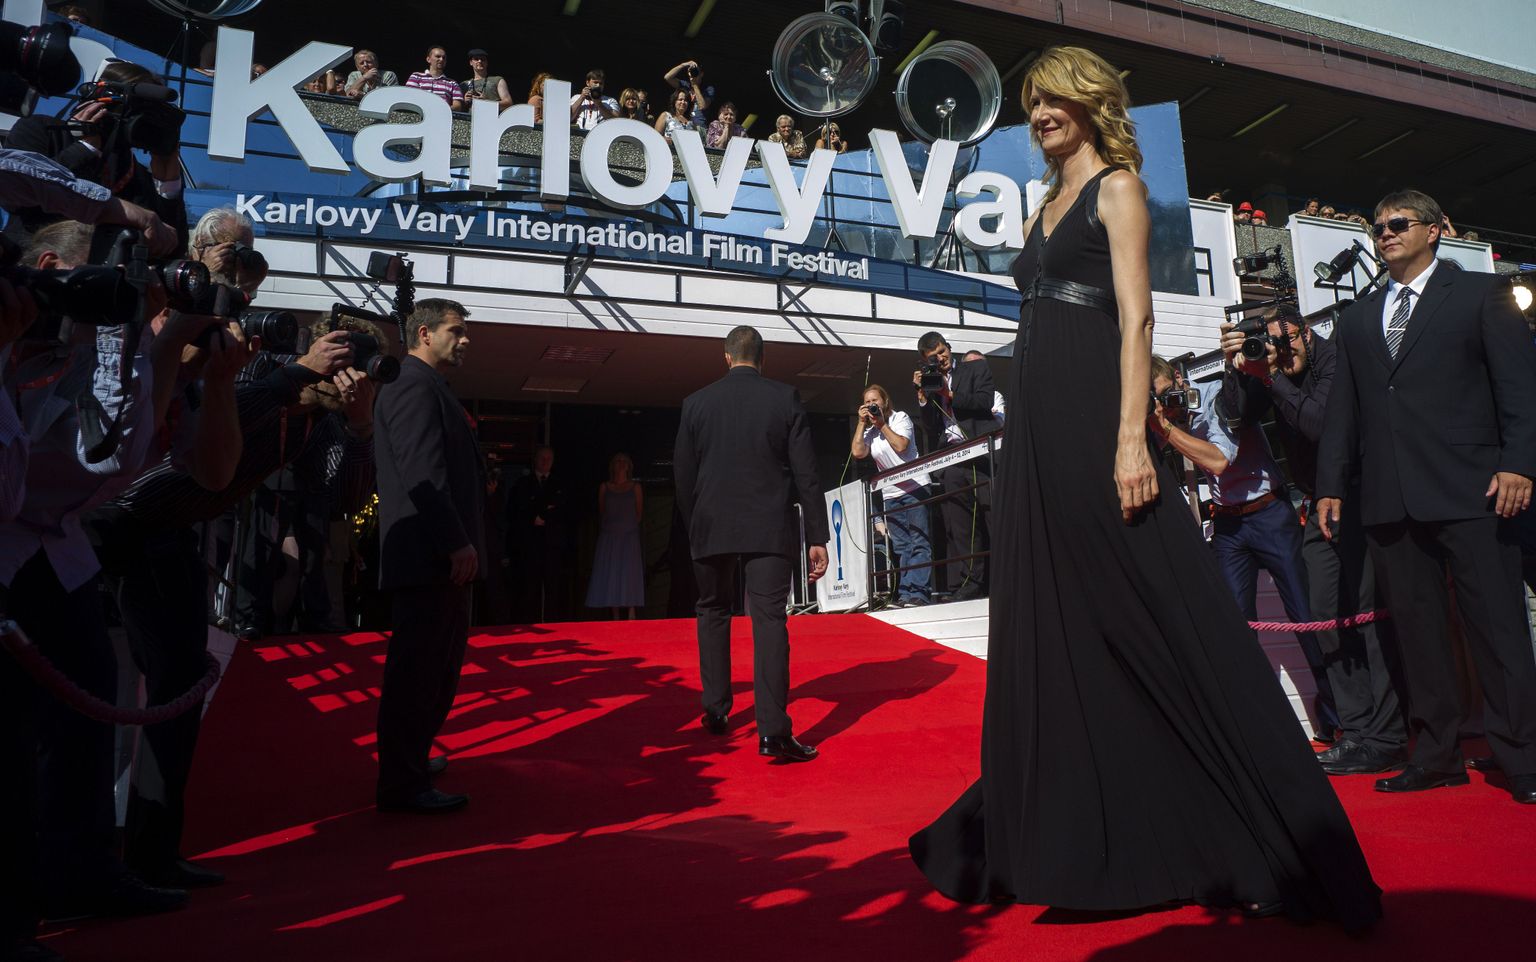 US actress Laura Dern (2ndR) poses for photographers on the red carpet as she arrives for the closing ceremony of the 49th Karlovy Vary International Film Festival (KVIFF) in Karlovy Vary, Czech Republic on July 12, 2014.  AFP PHOTO / MICHAL CIZEK